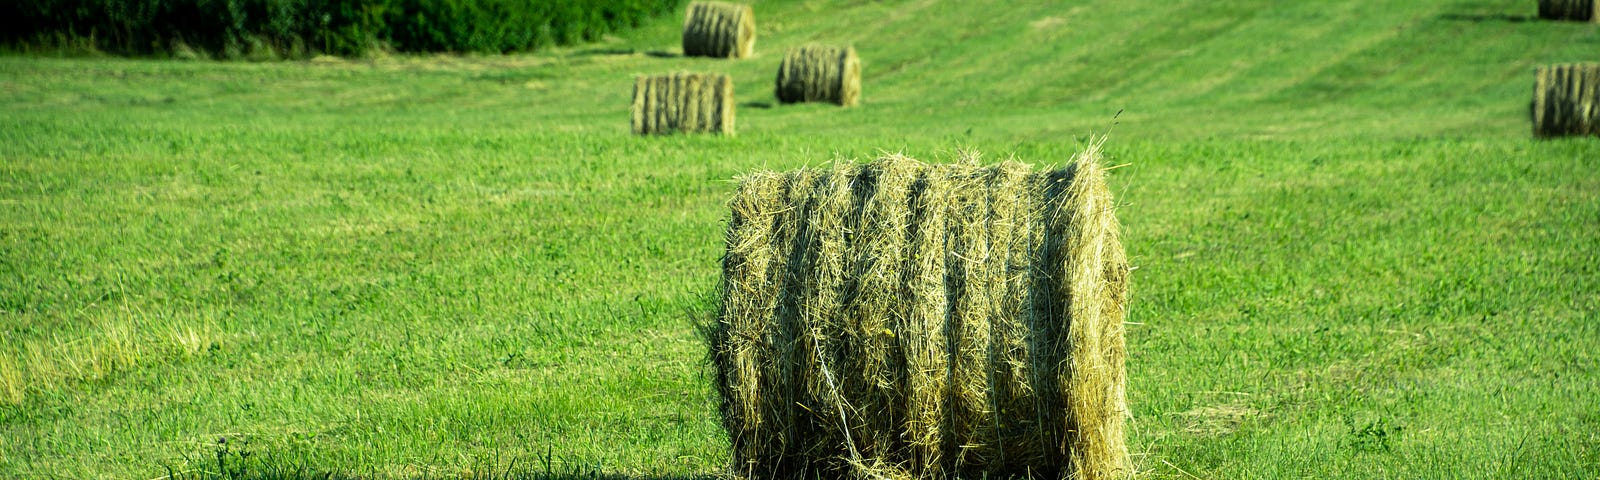 Green round hay bales in a field.